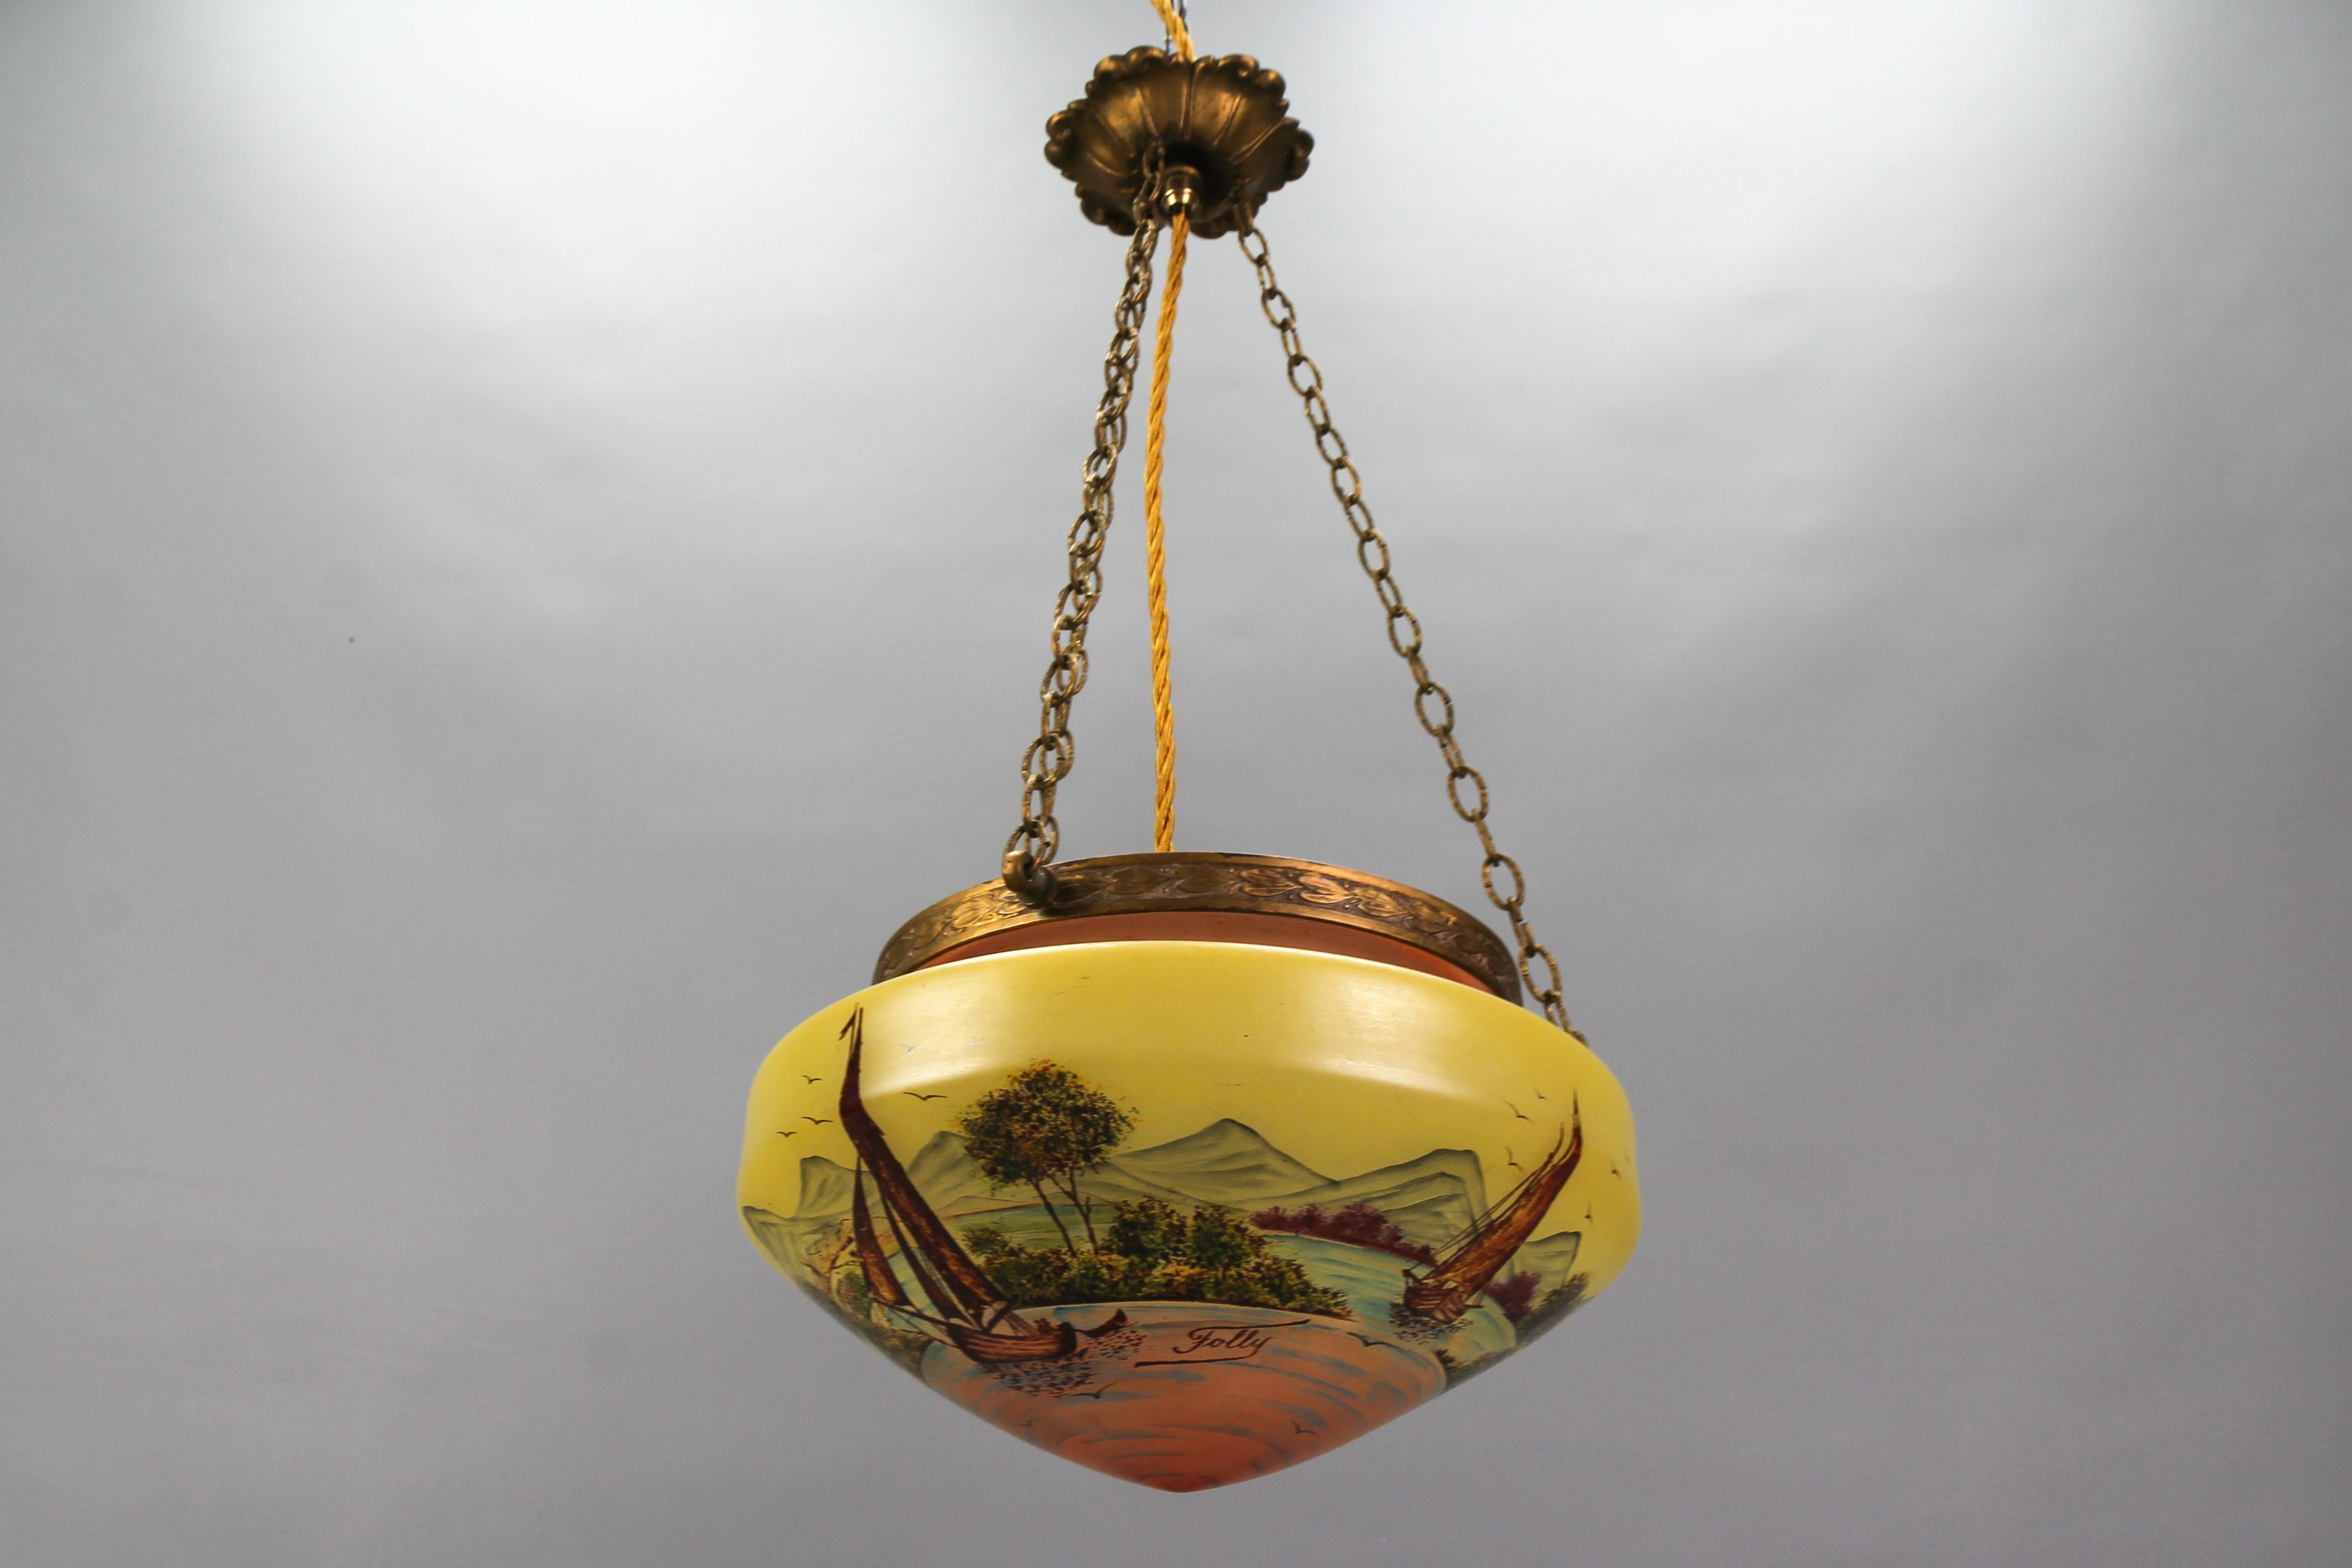 Neoclassical style brass and glass pendant light with hand-painted landscape from circa the 1920s.
This stunning Neoclassical-style pendant light fixture features a yellow and pale salmon color glass lampshade - an oval bowl. The lampshade is